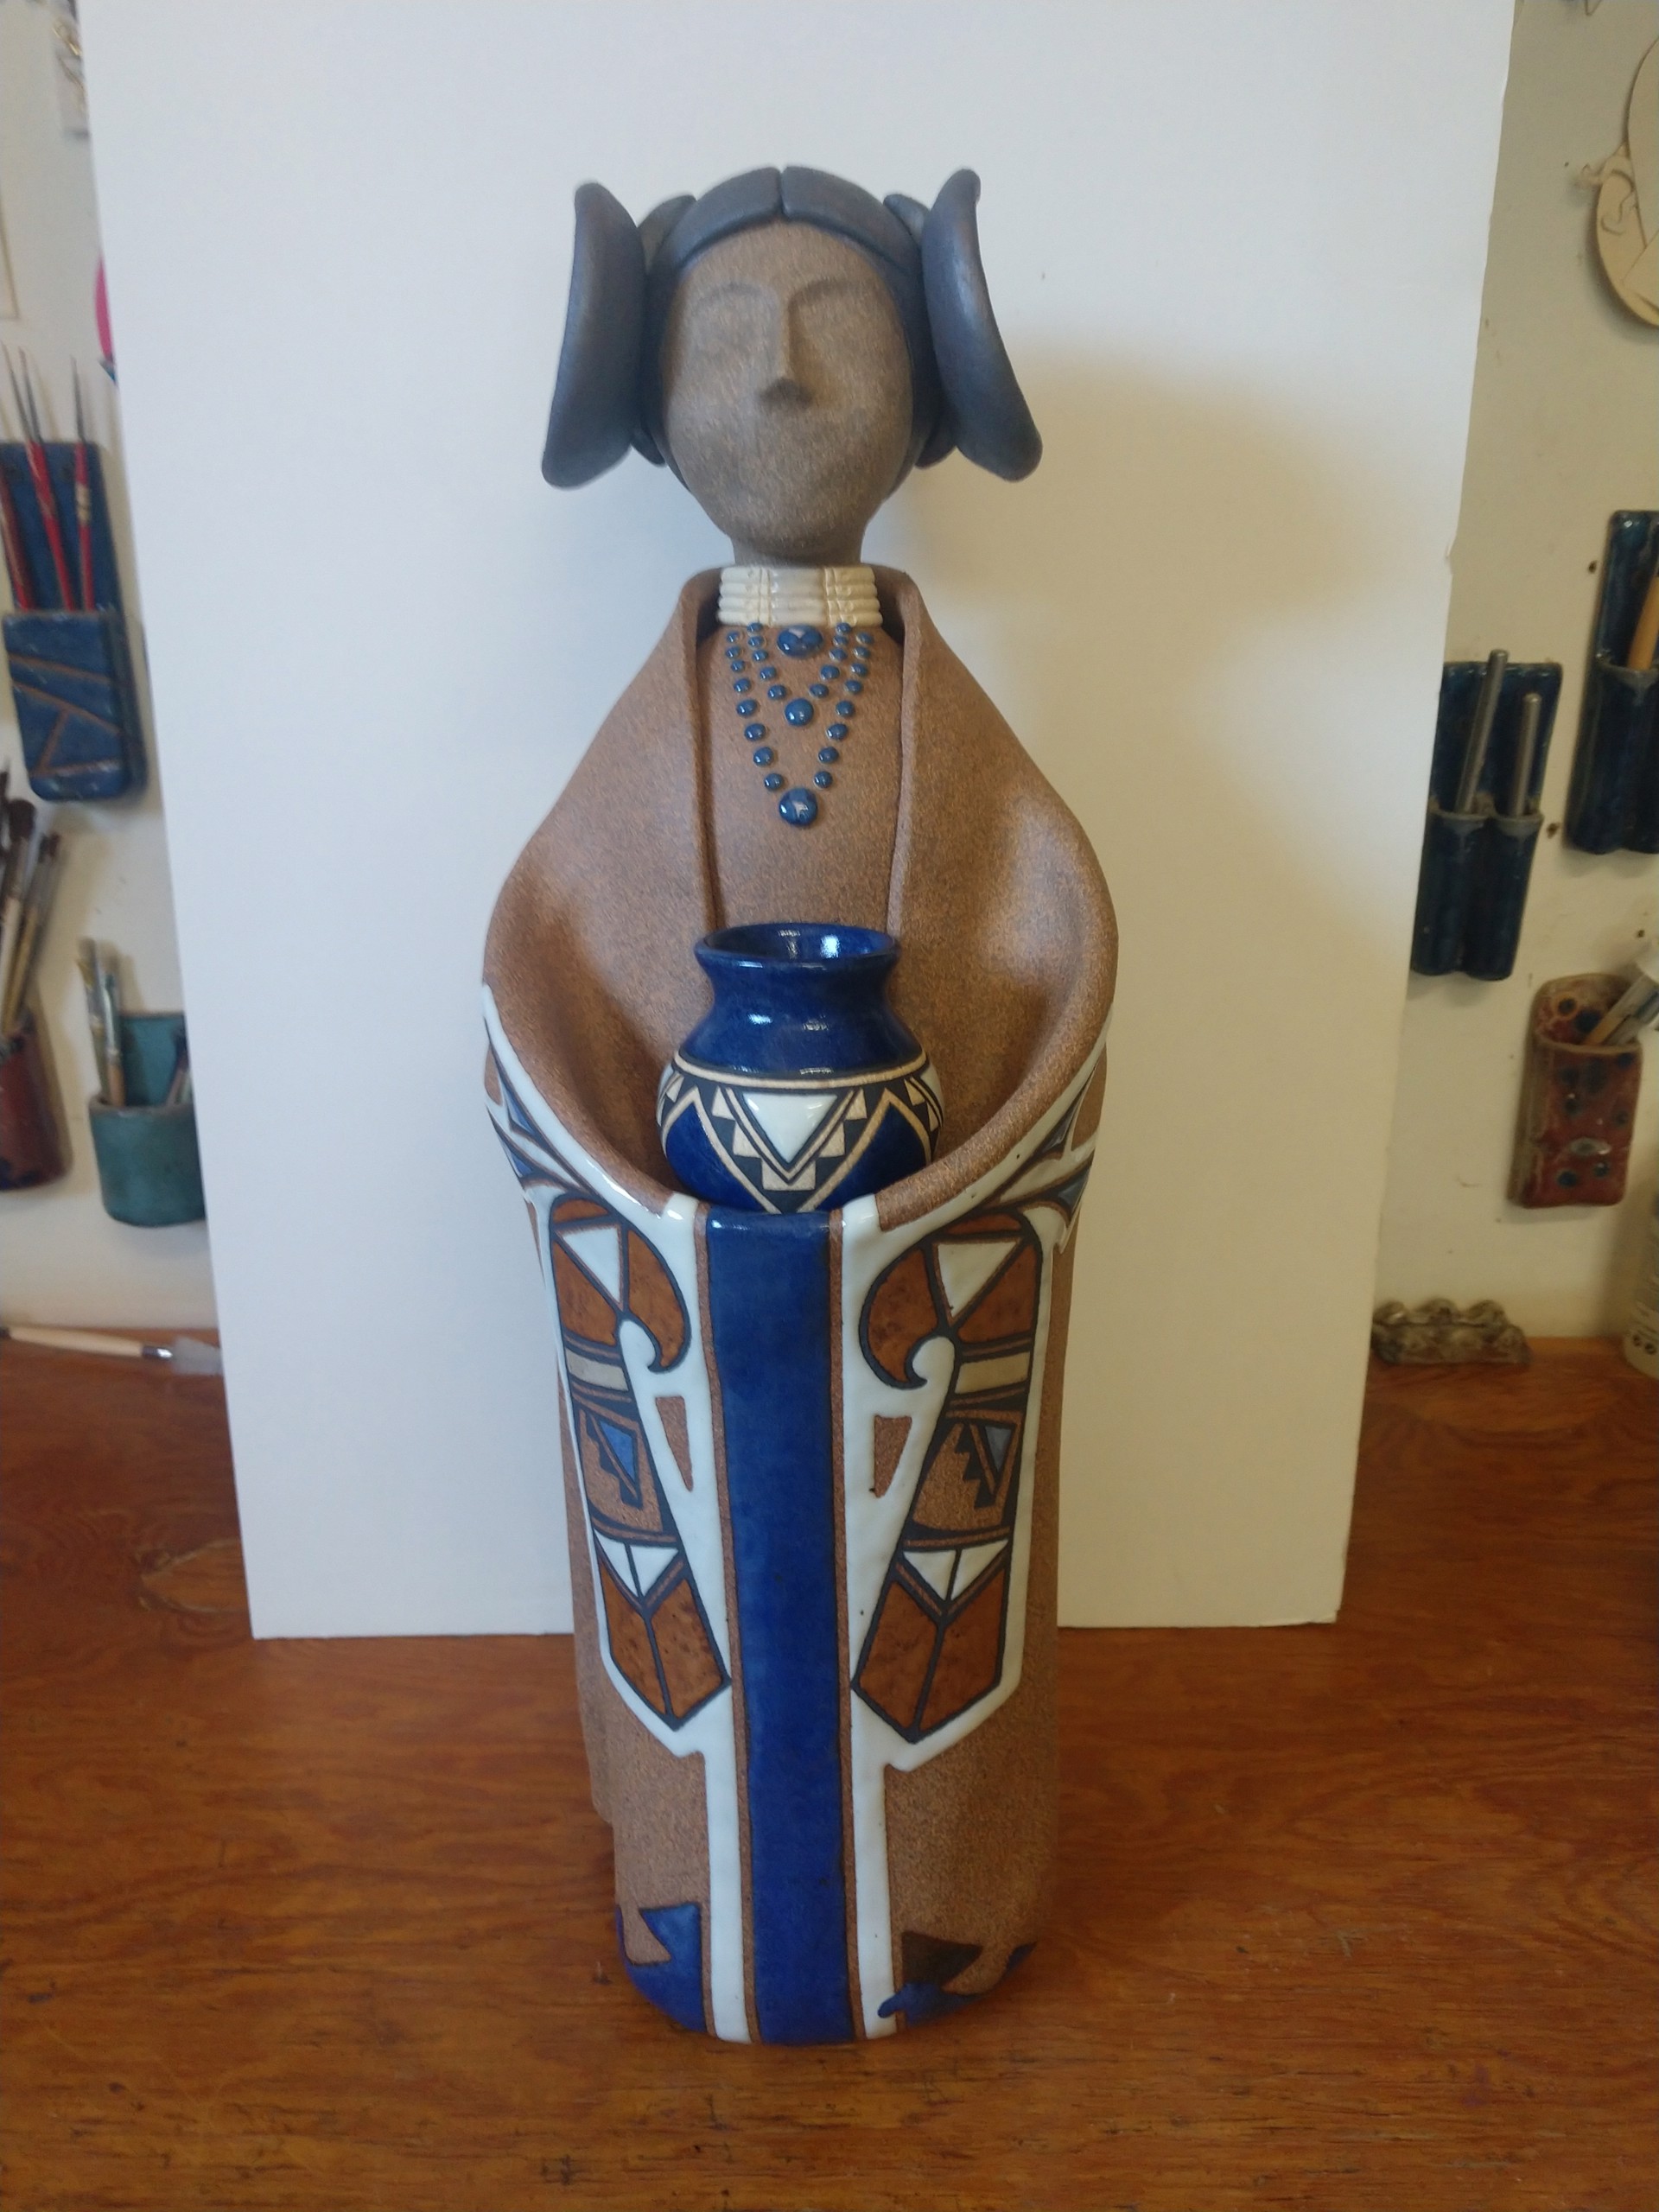 Garcia Commission ~ Hopi Maiden Fountain ~ Rainbird Design ~ Undefined Face by Terry Slonaker